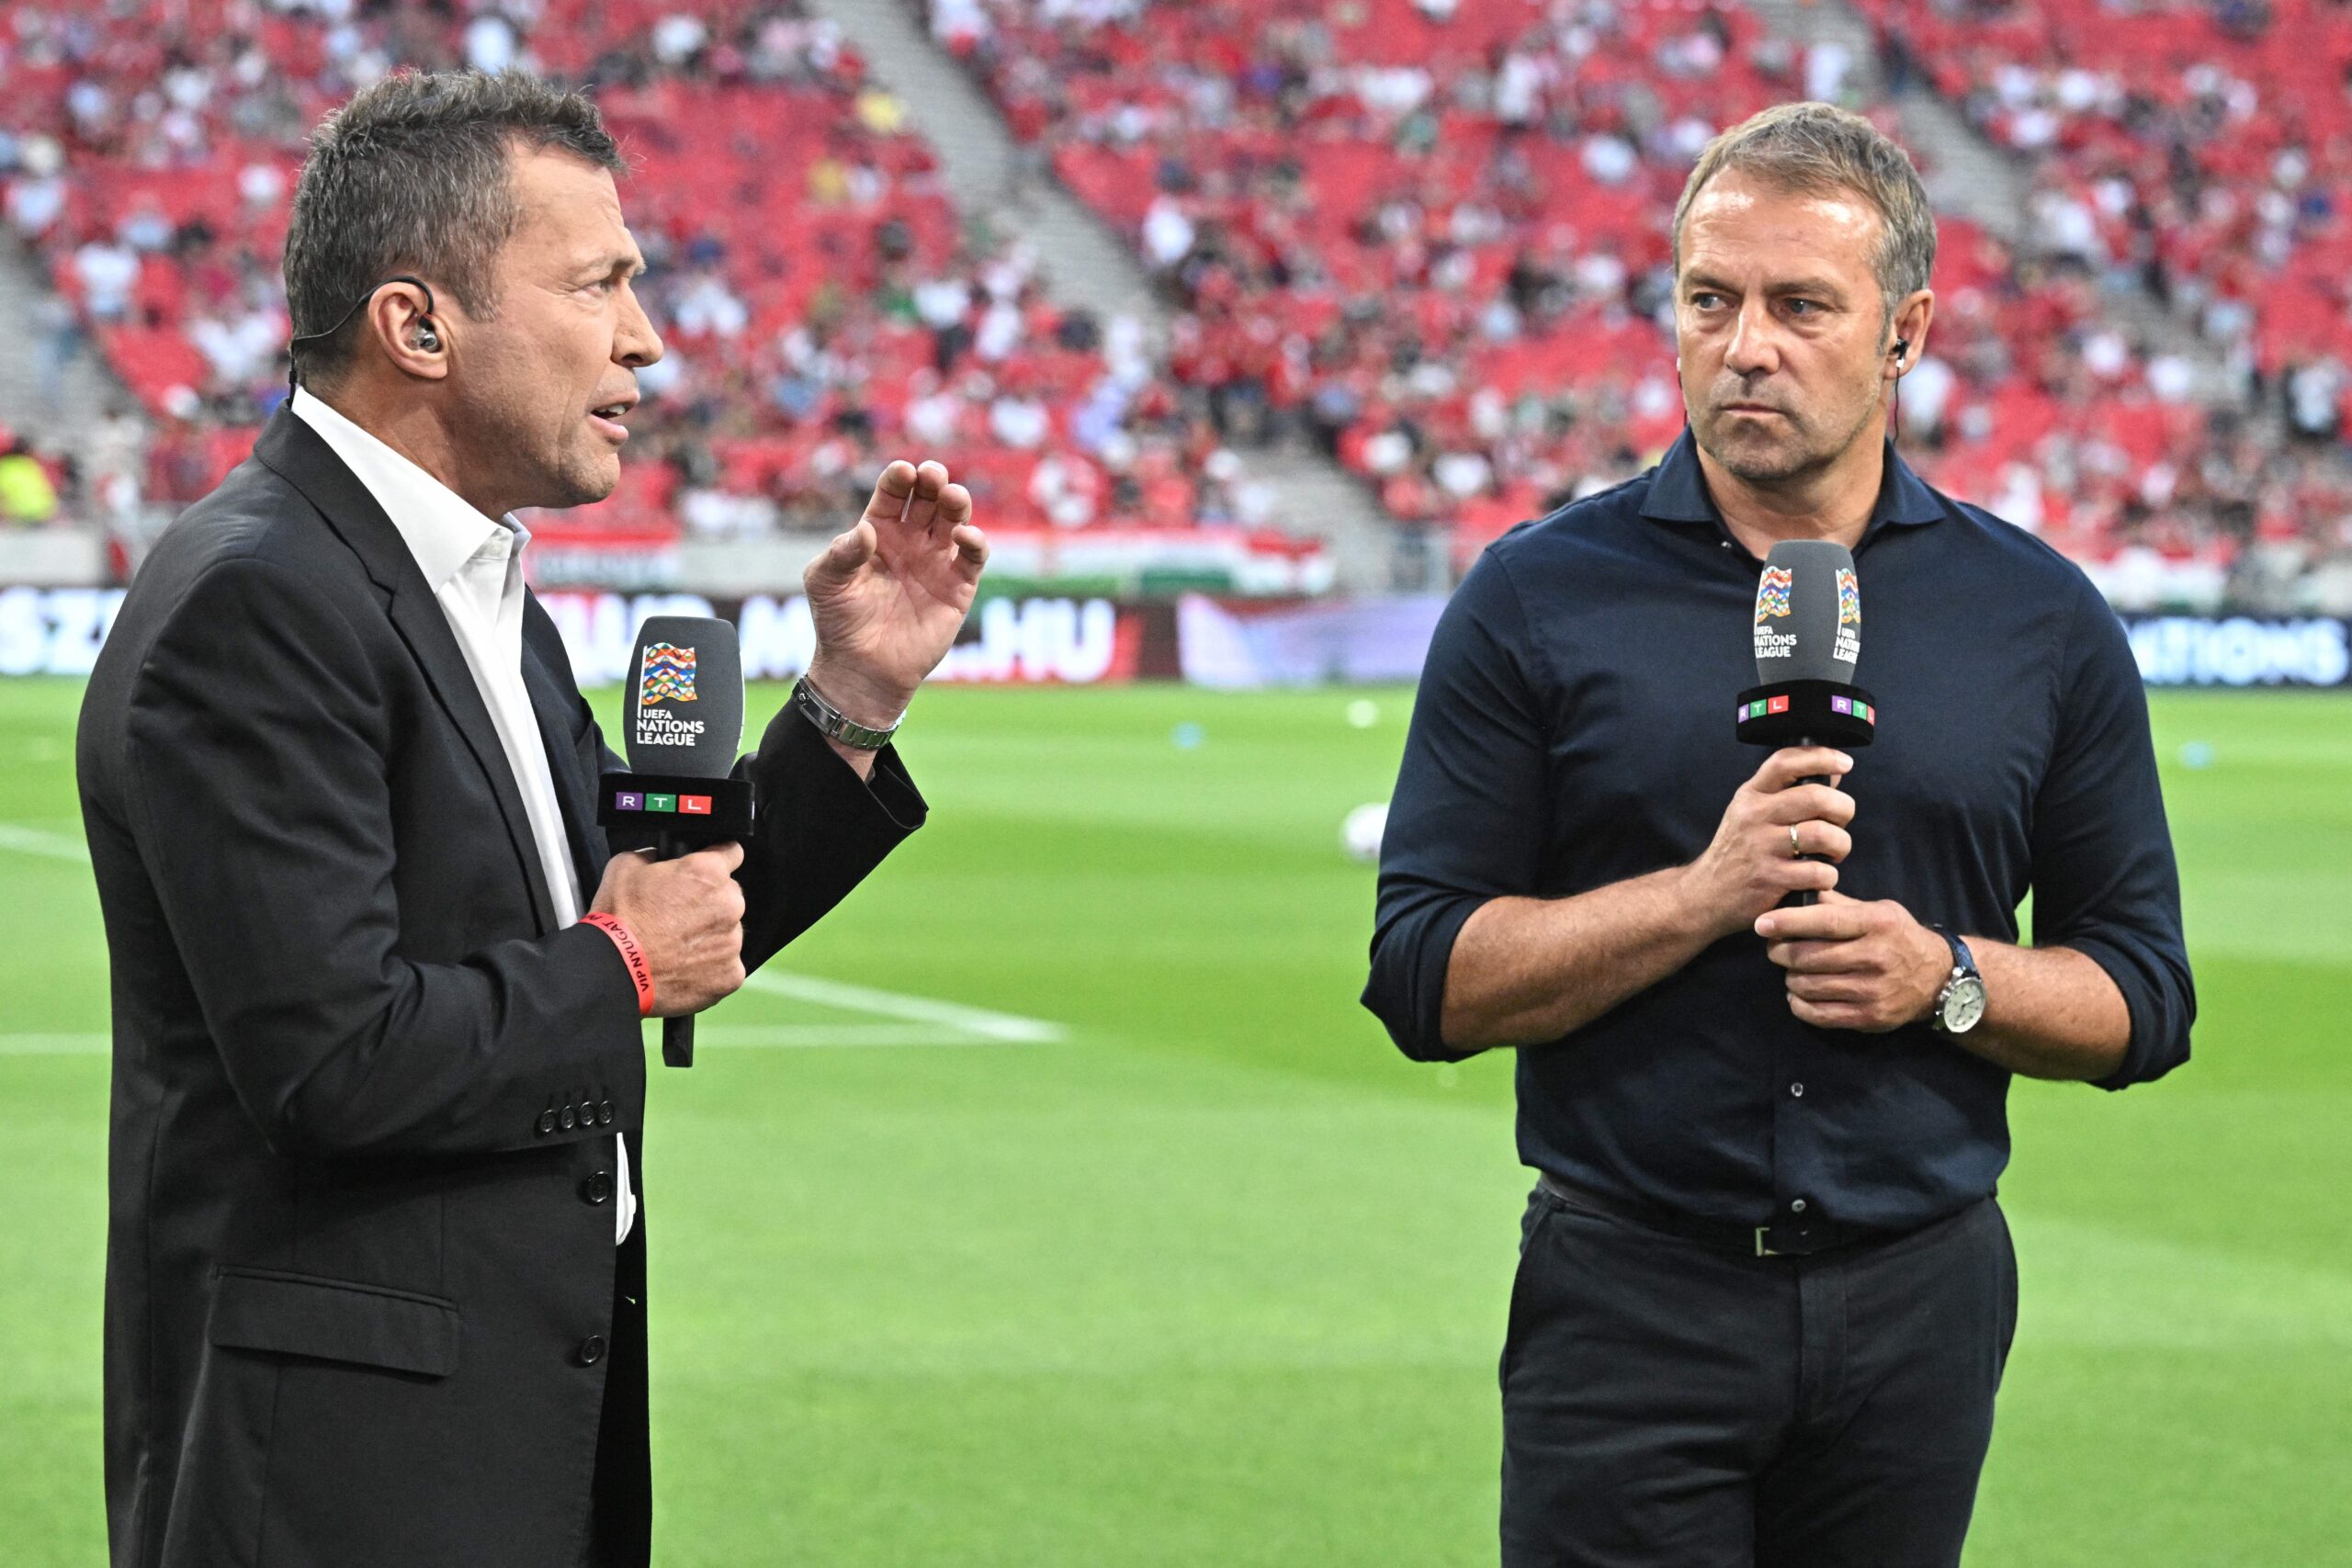 Germany's coach Hans-Dieter Flick (R) speaks with former Germany player Lothar Matthaus  for television prior to the UEFA Nations League football match Hungary v Germany in Budapest on June 11, 2022.